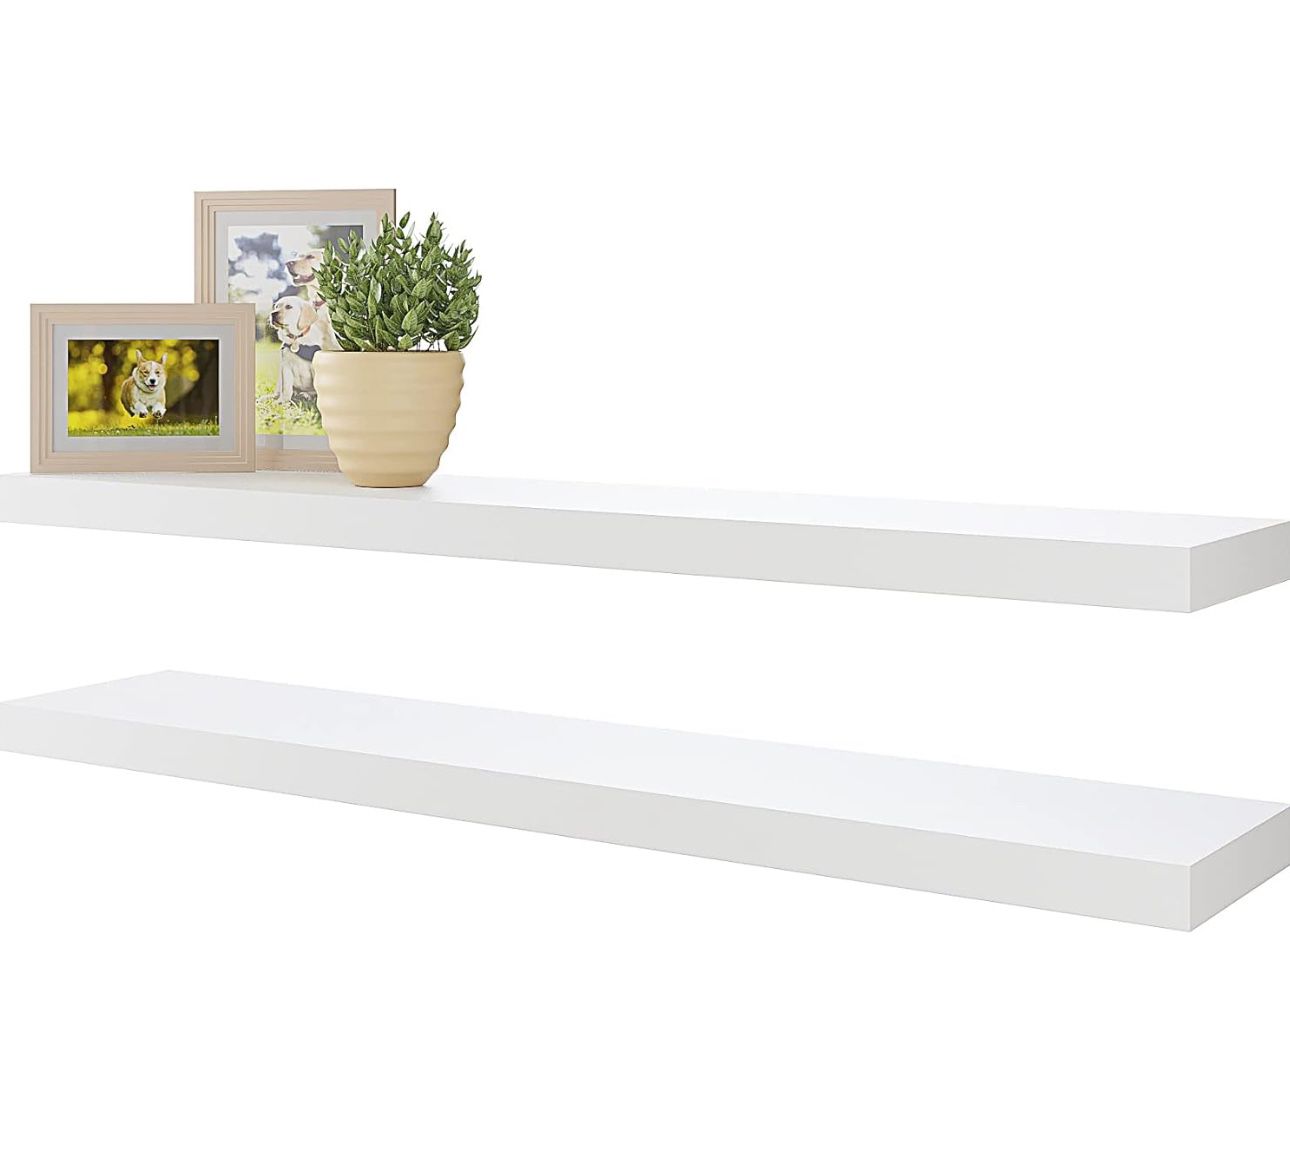 New Set Of 2 BAMEOS Floating Shelves,40 in W x 8in D